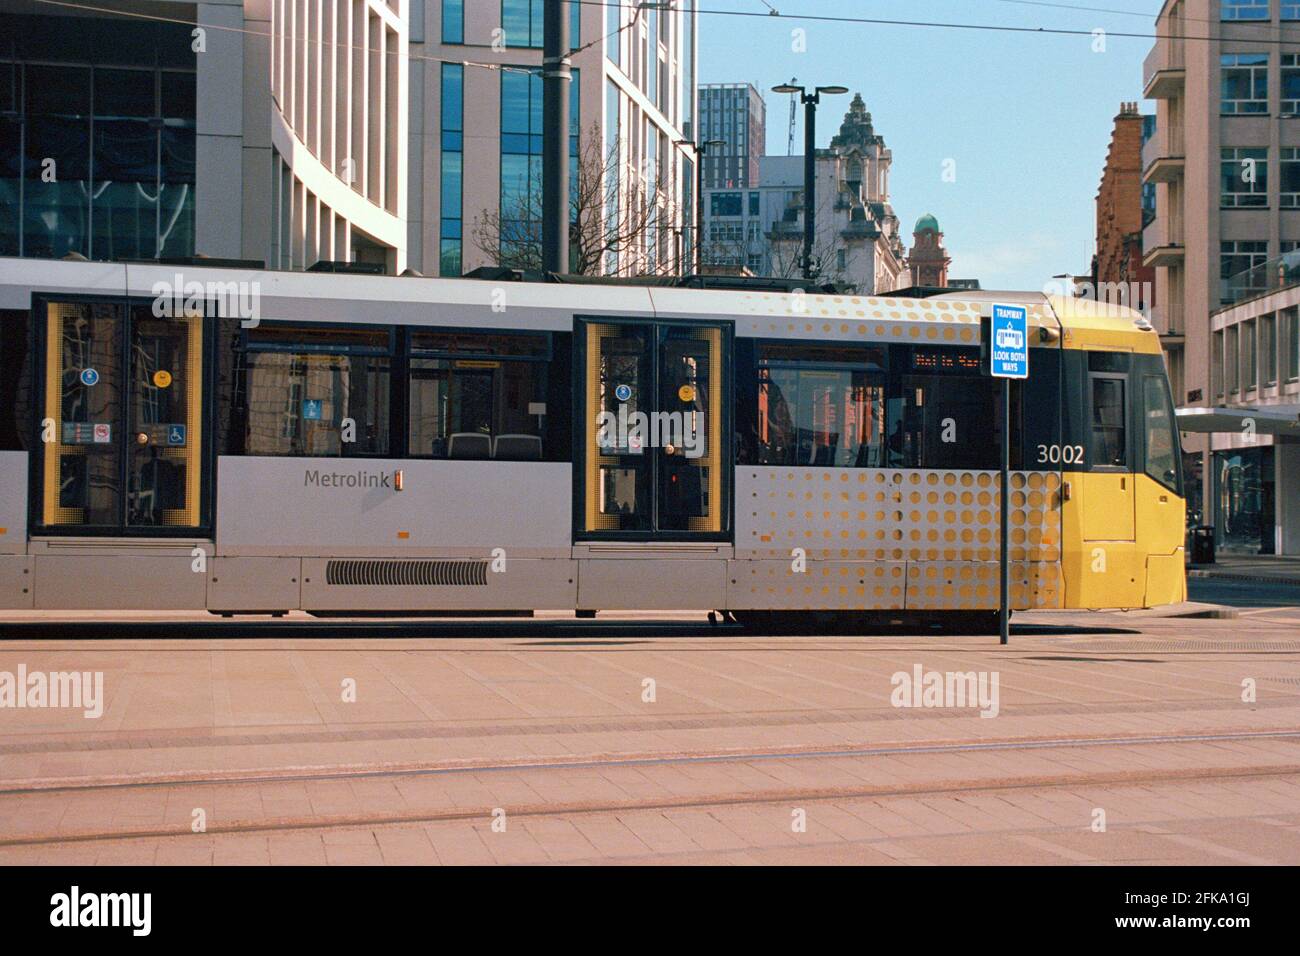 Manchester, UK - 3 April 2021: A Manchester Metrolink tram at St Peter's Square. Stock Photo